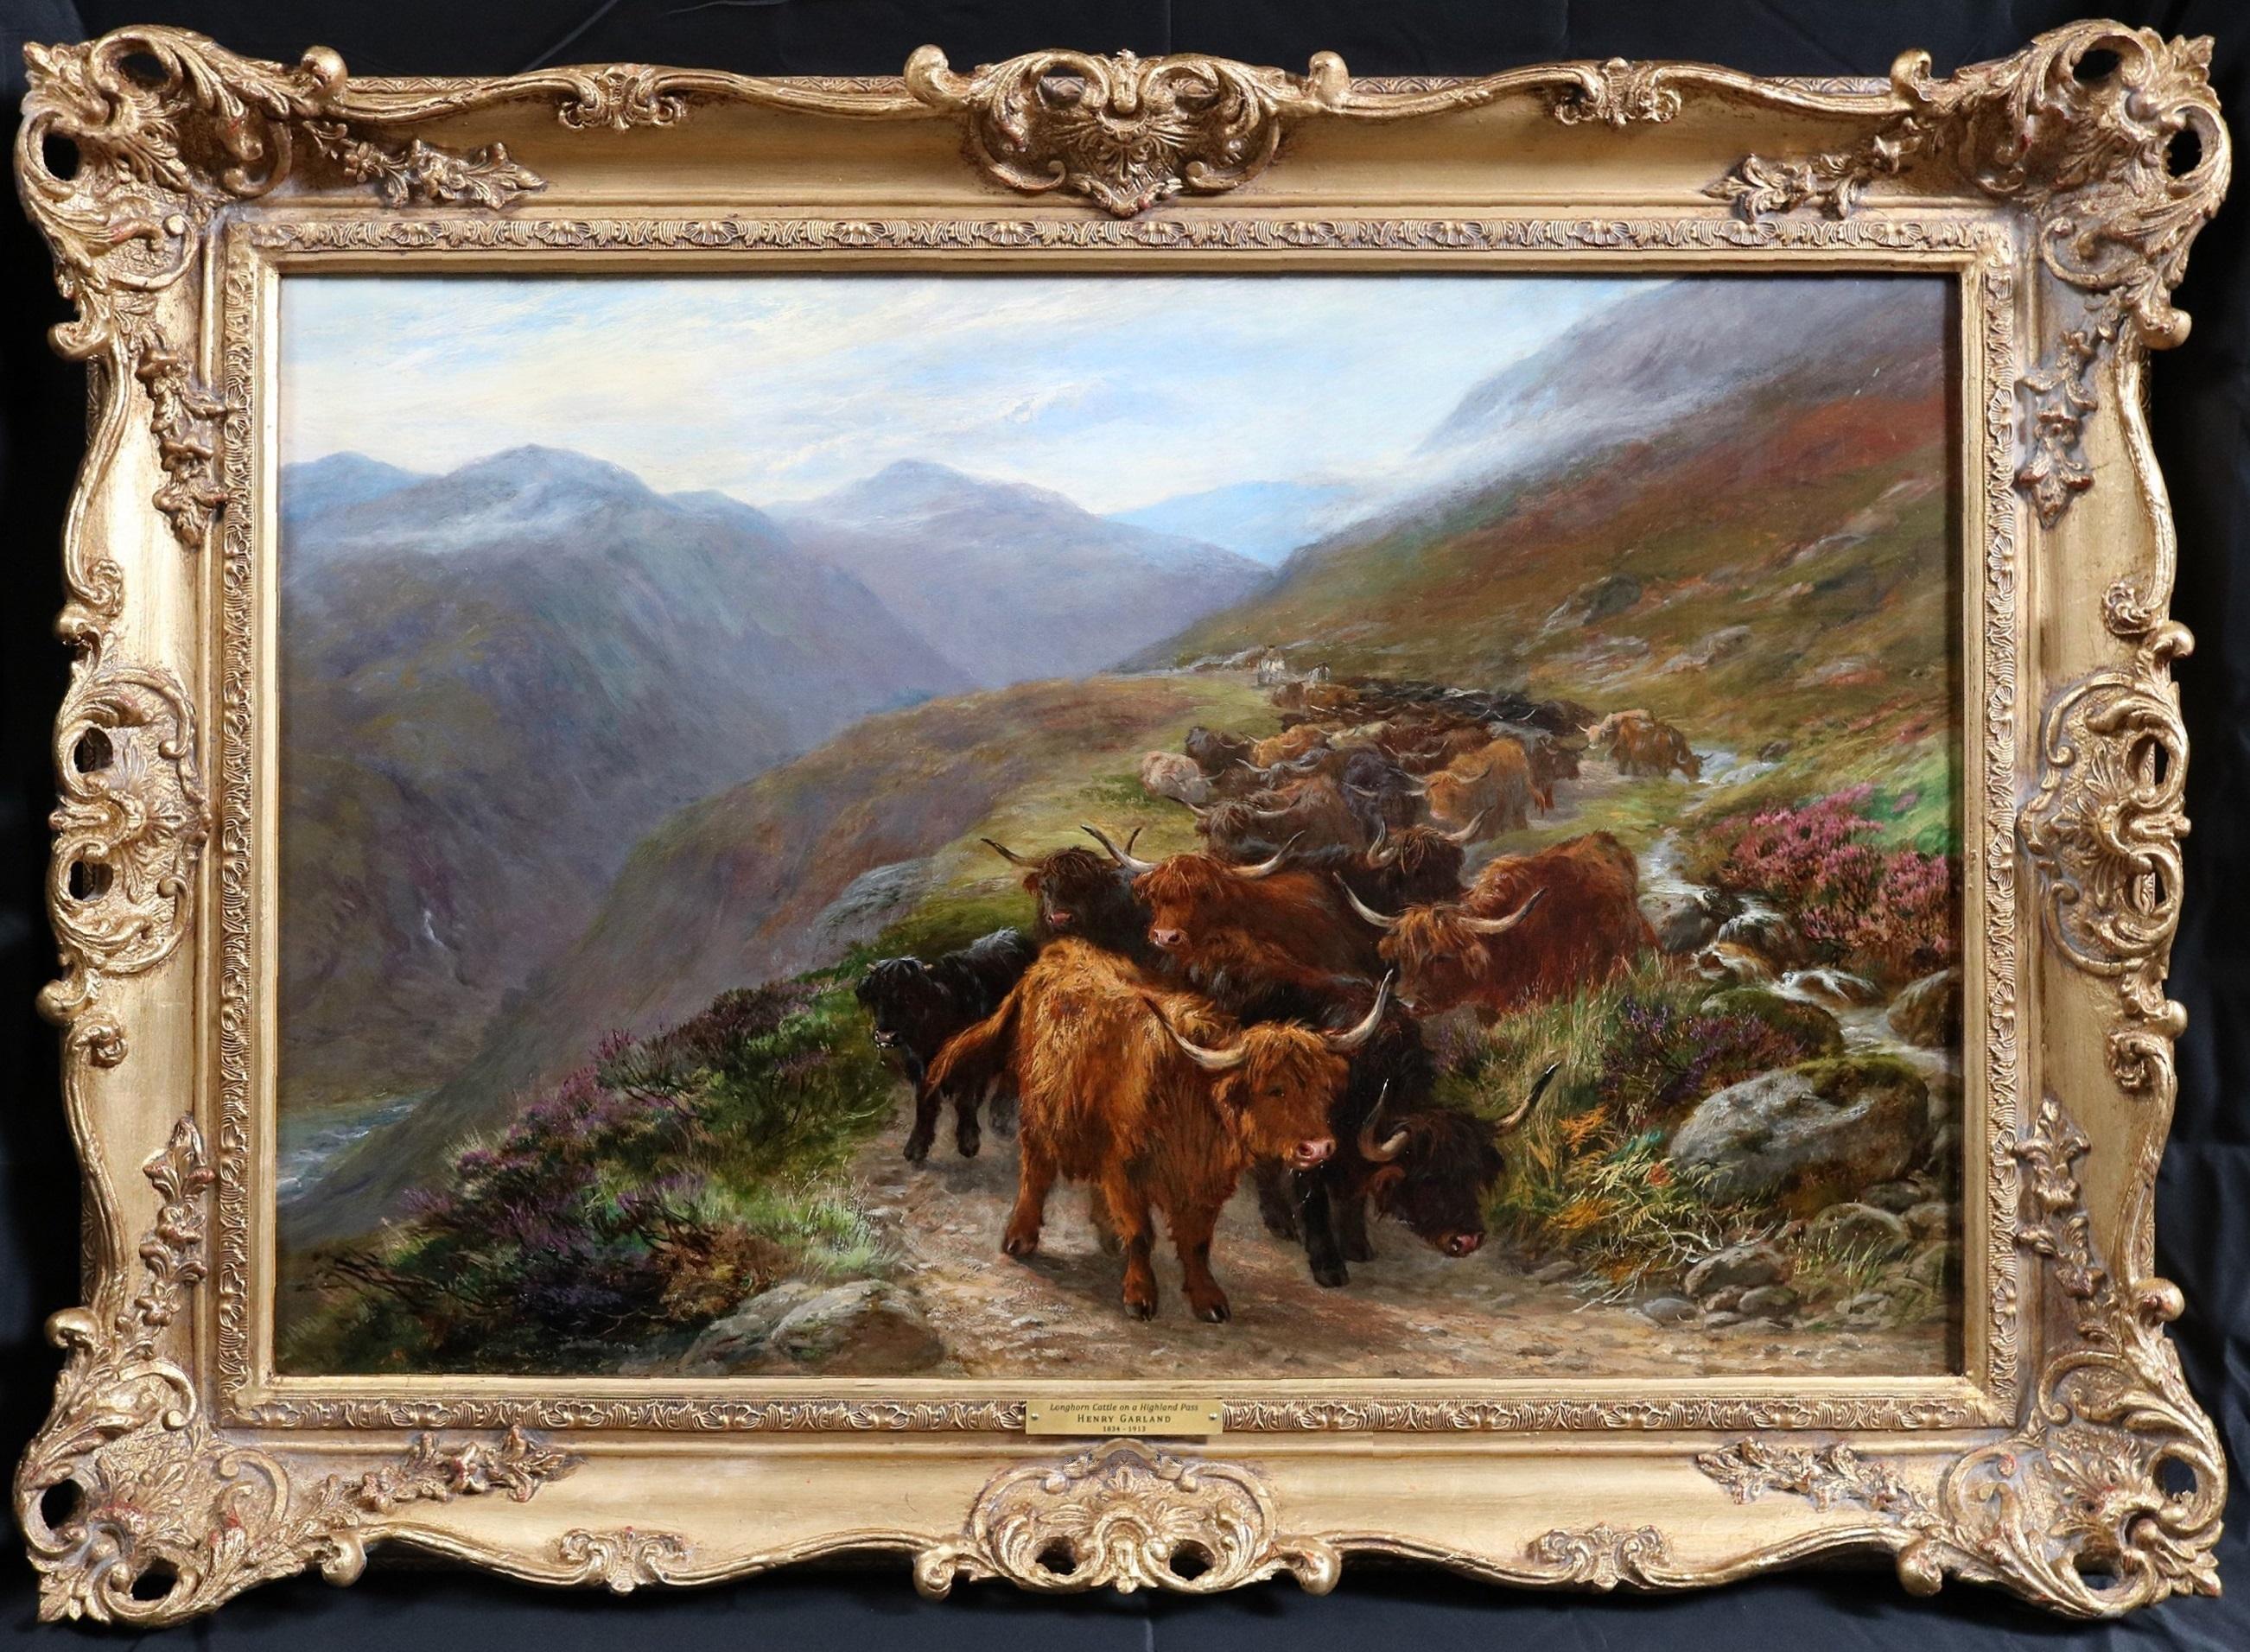 Longhorn Cattle on Highland Pass - 19th Century Oil Painting Scottish Landscape - Brown Landscape Painting by Henry Garland